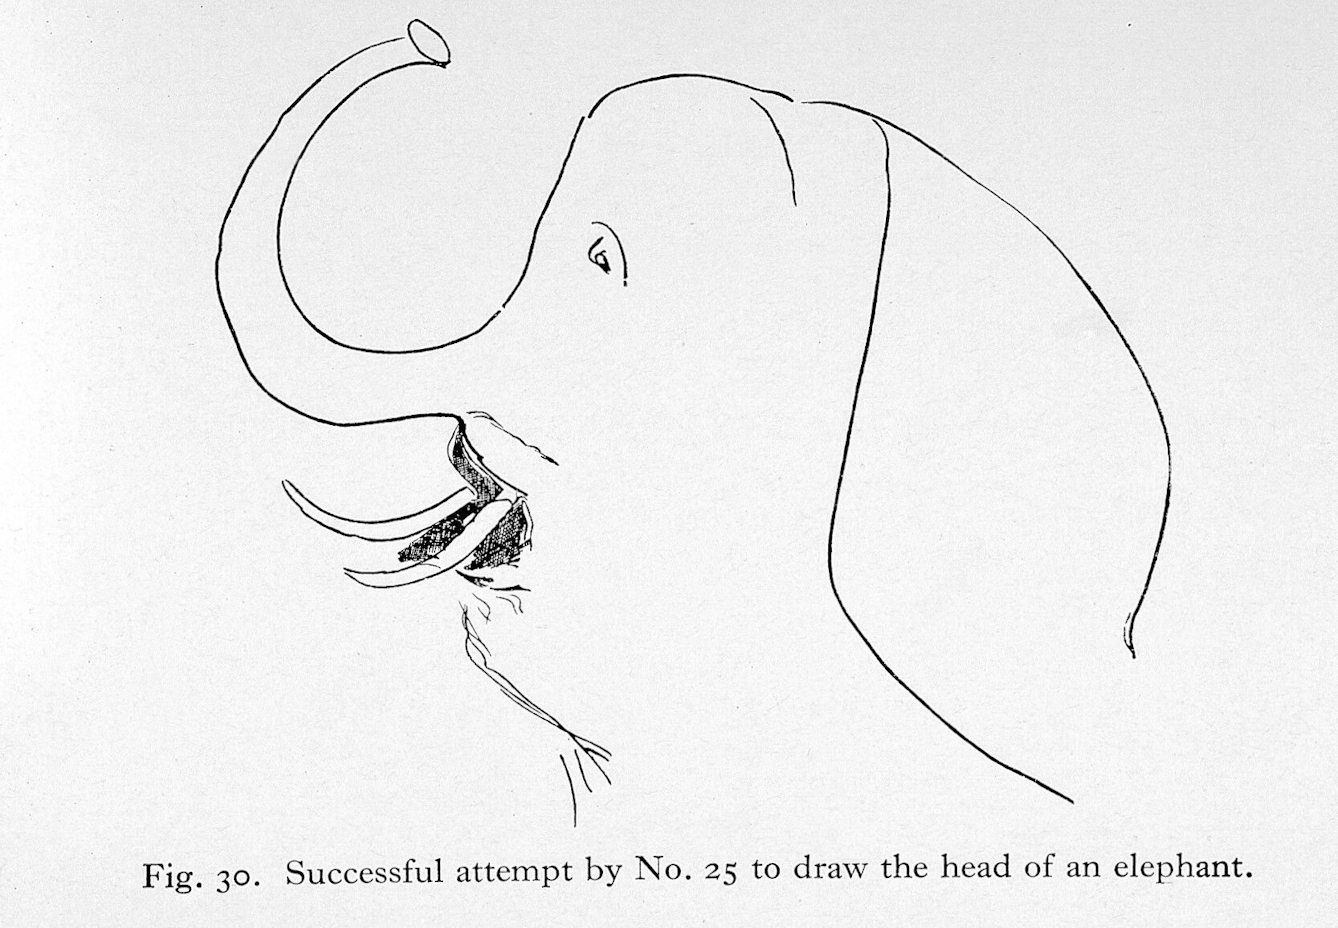 Pencil drawing of an elephant's head with trunk raised. The text at the bottom of the image reads: "Fig. 30. Successful attempt by No. 25 to draw the head of an elephant"